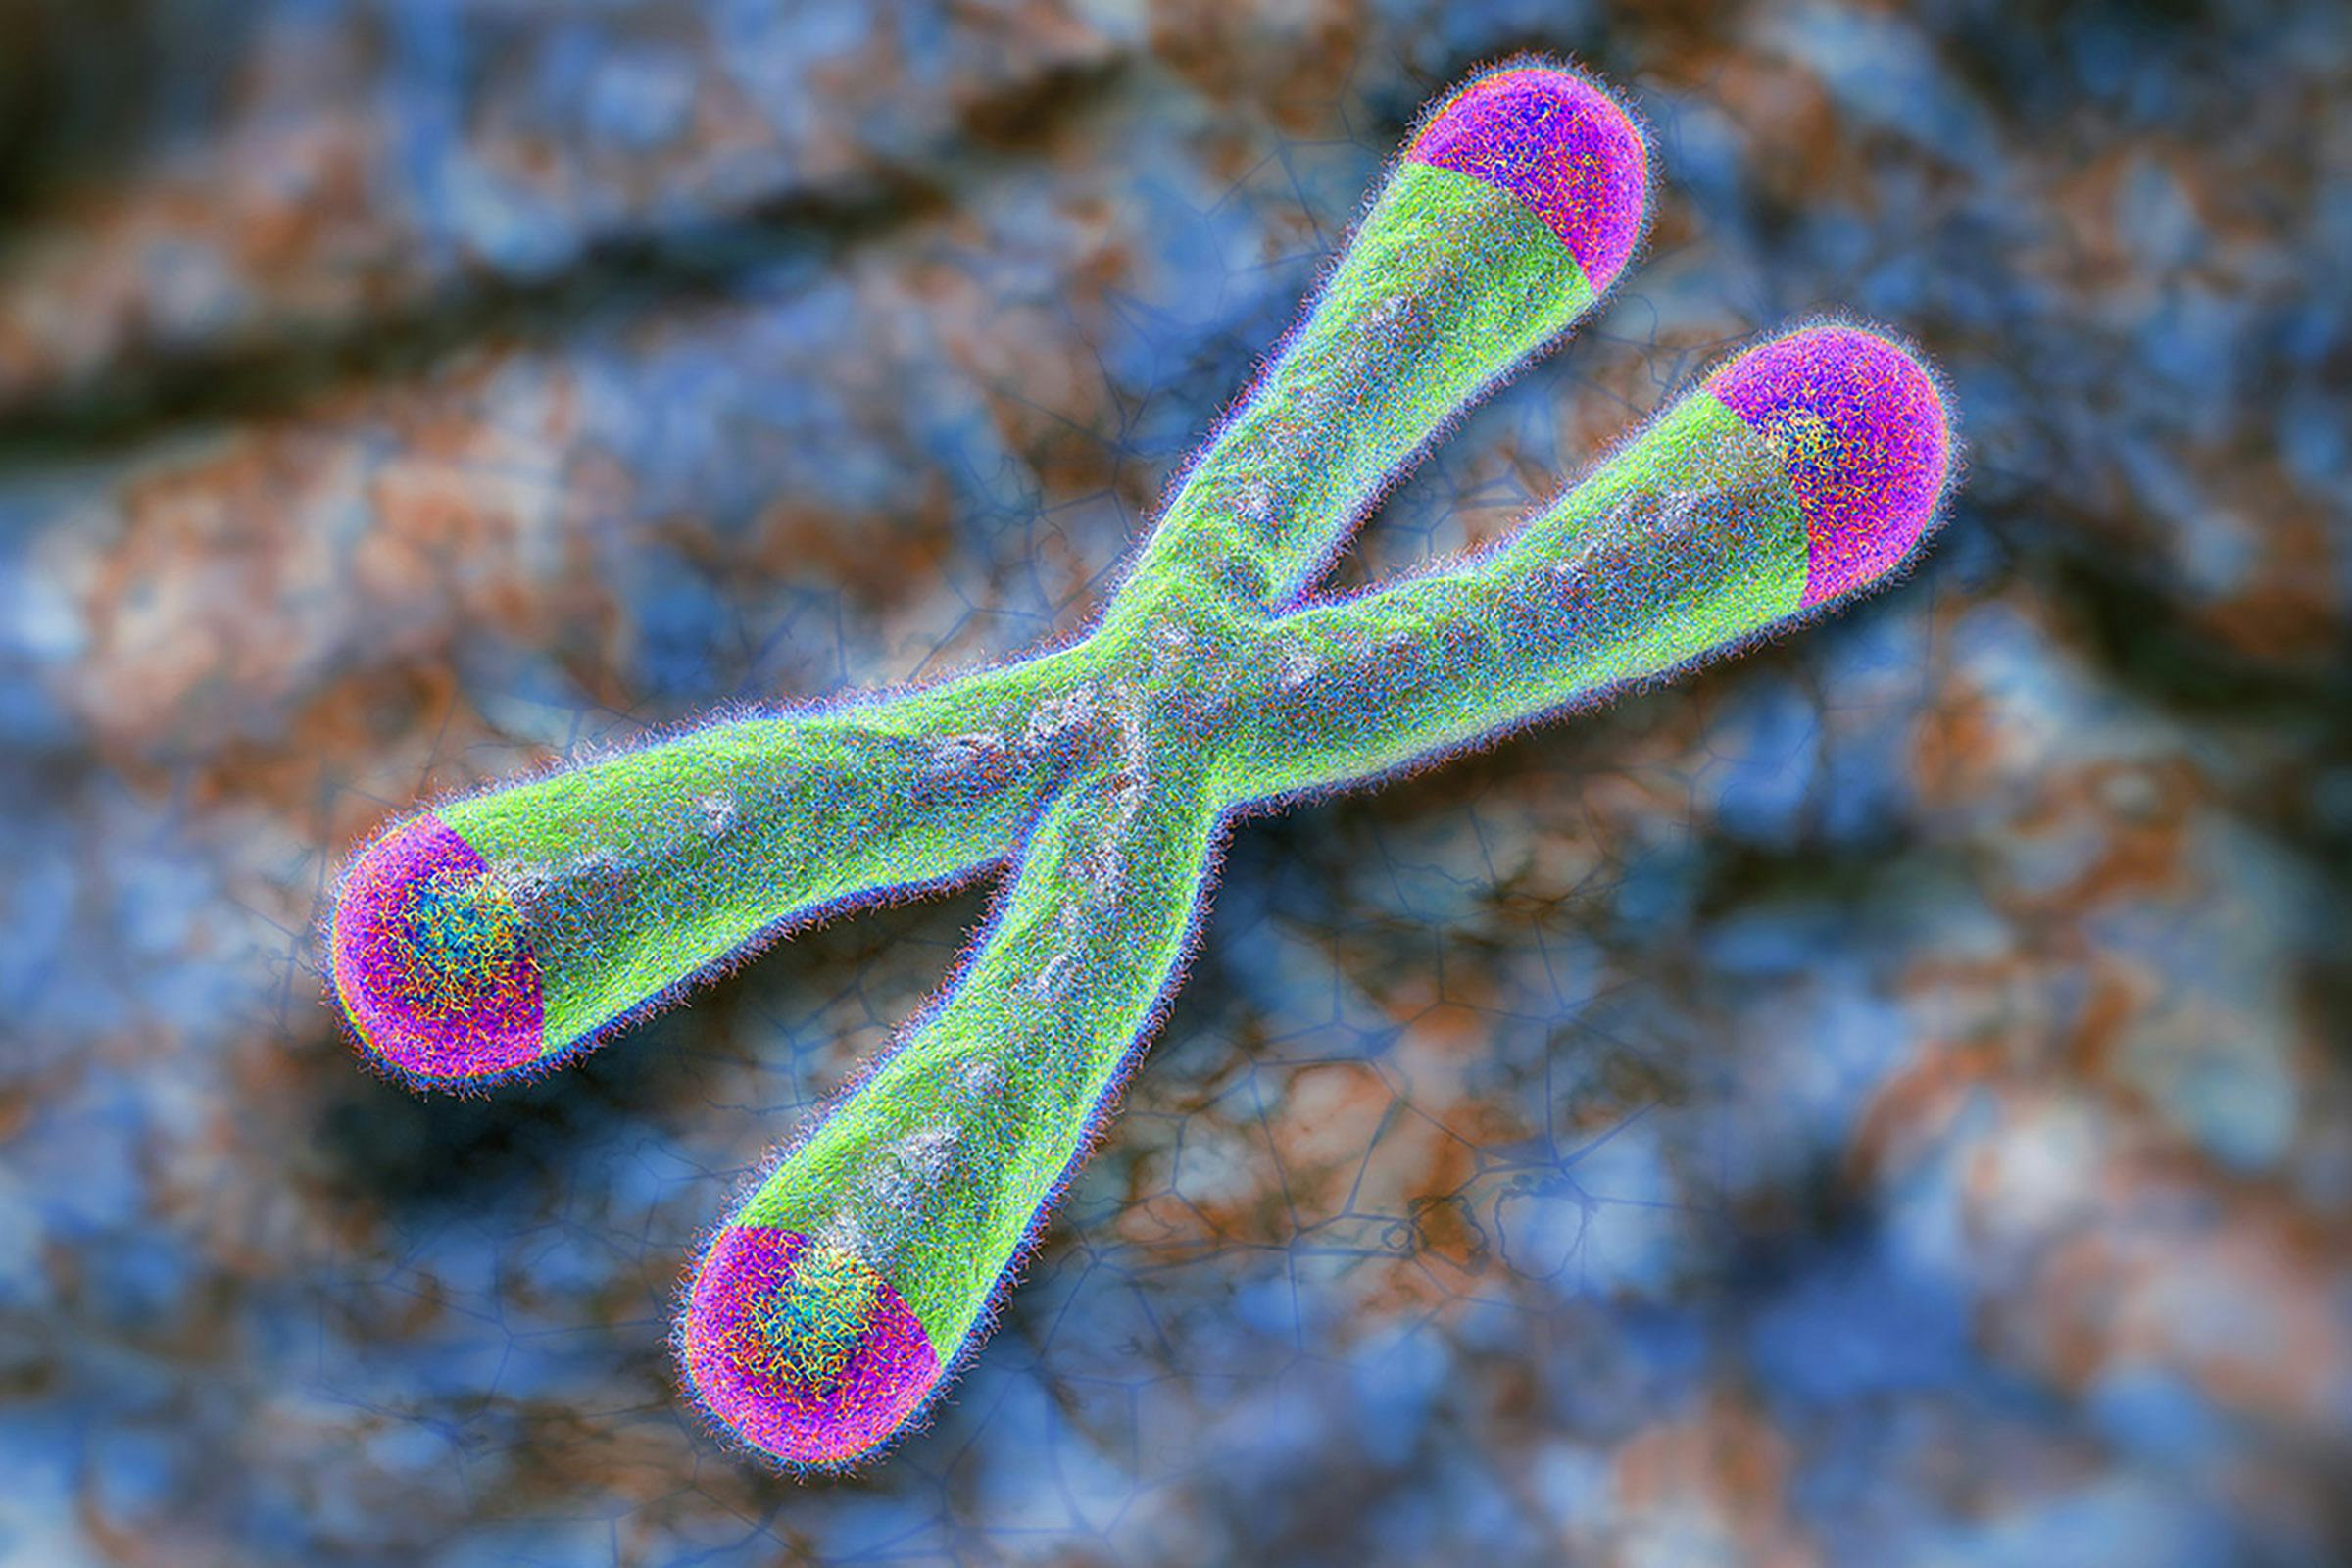 Illustration of a green, x-shaped chromosome with pink tips